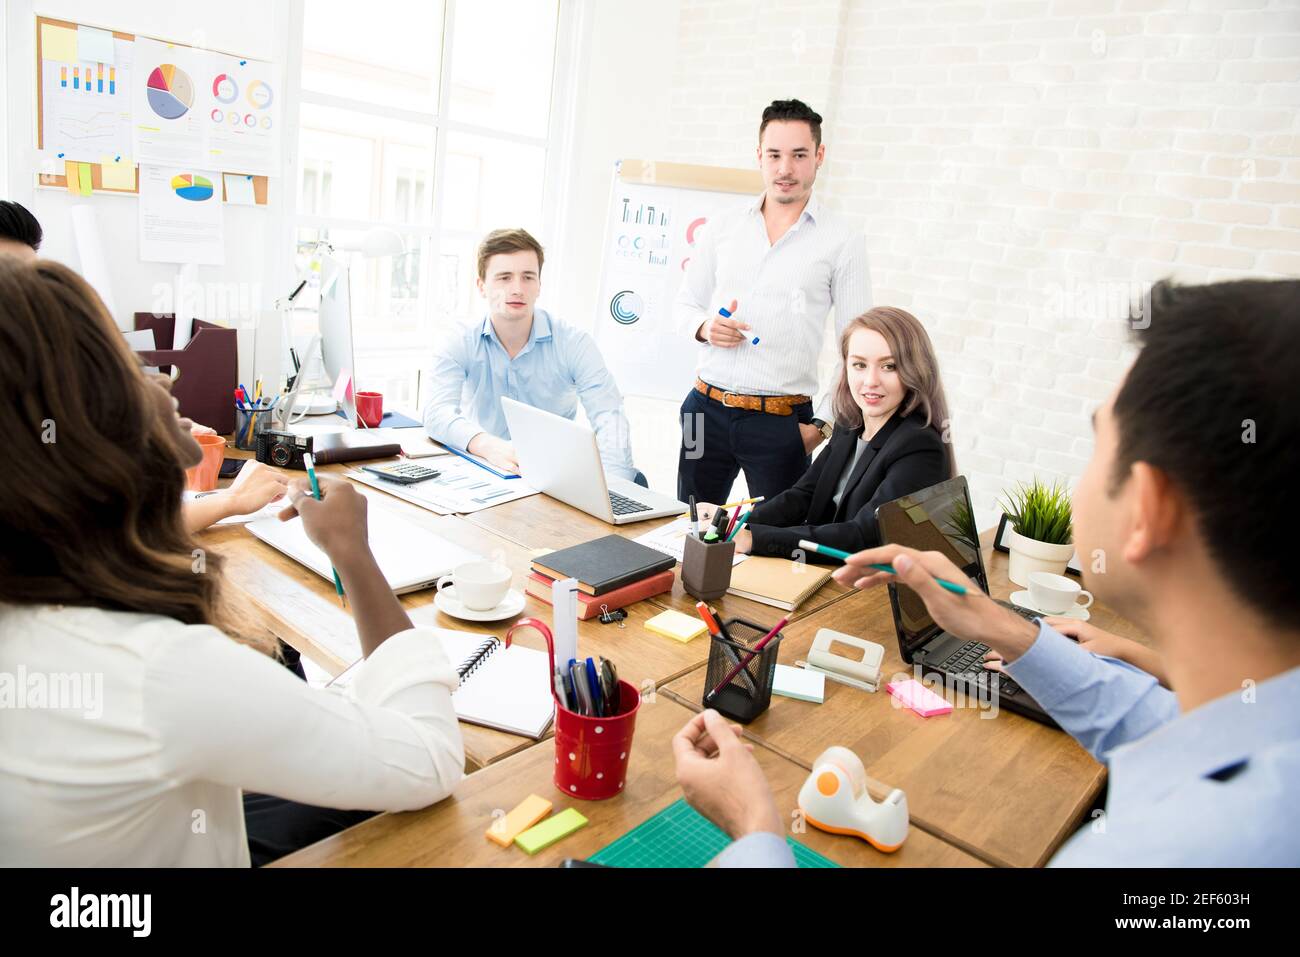 Group of multiethnic casual business people discussing work in co-working space Stock Photo